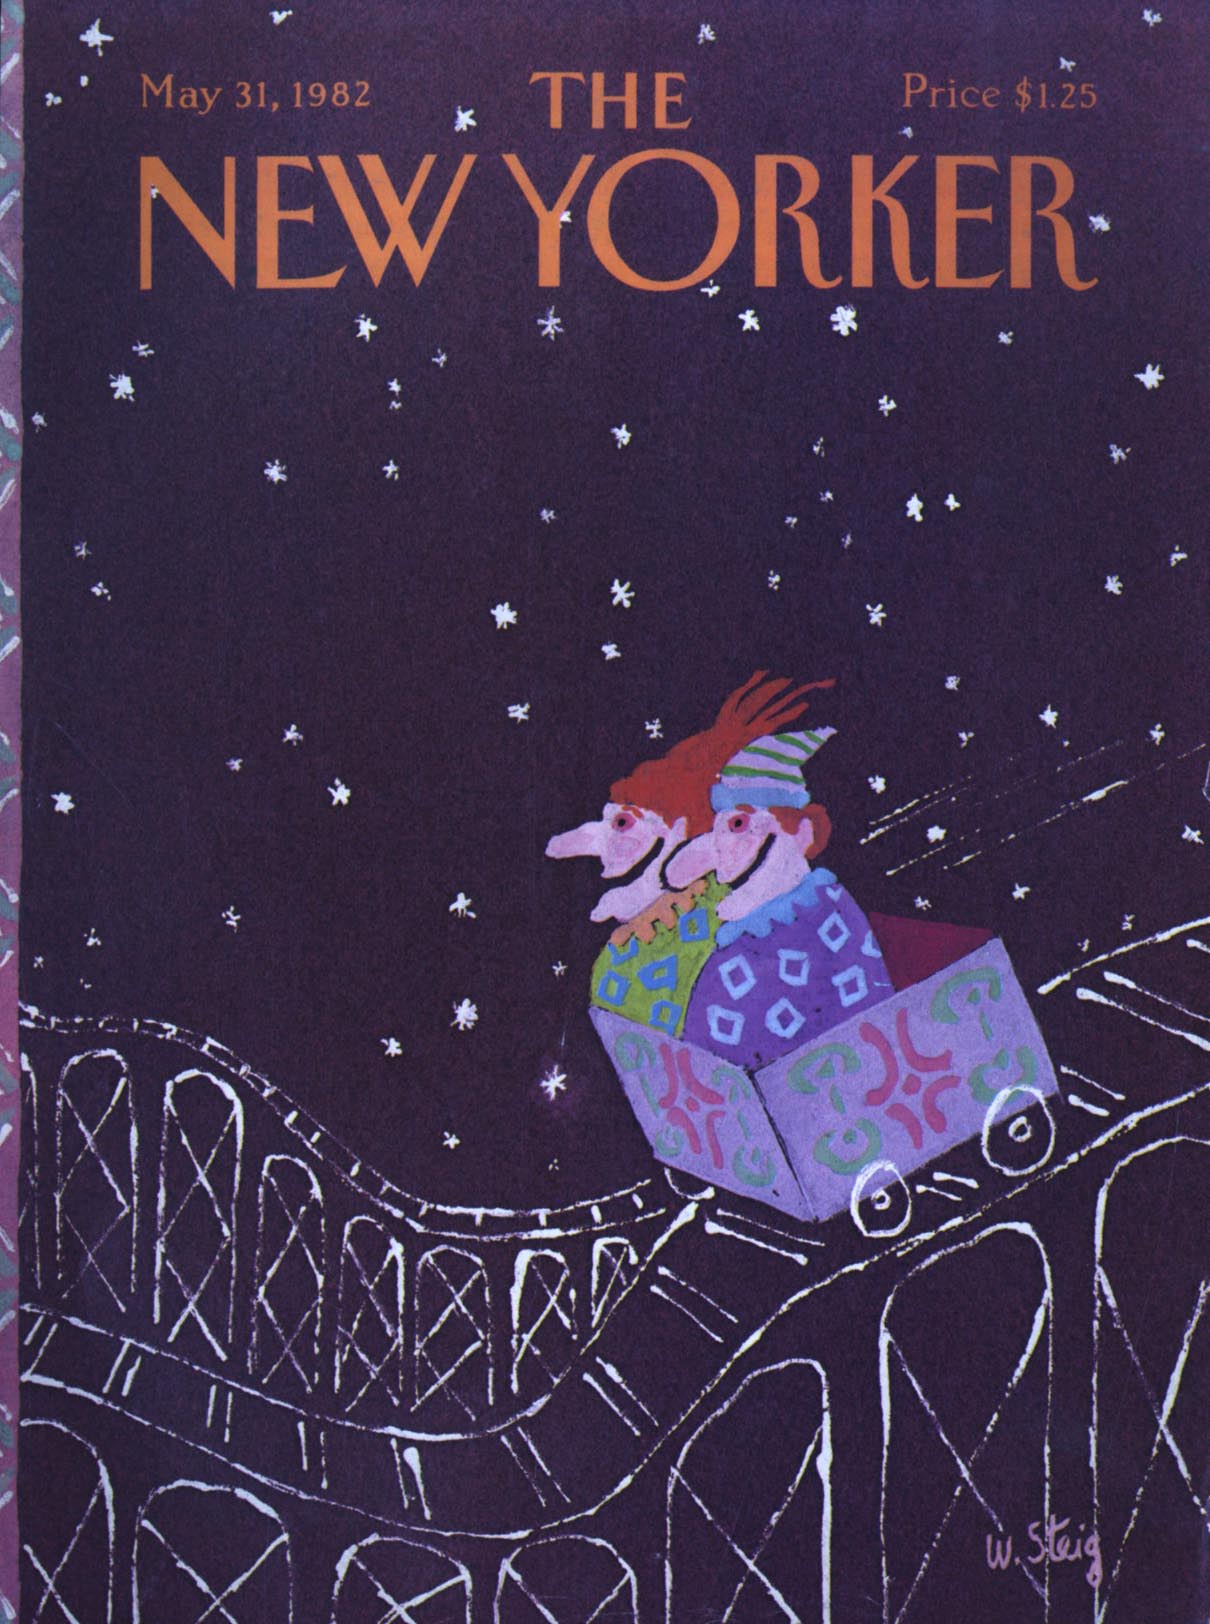 New Yorker Covers, Mullen Collection, Entertainment